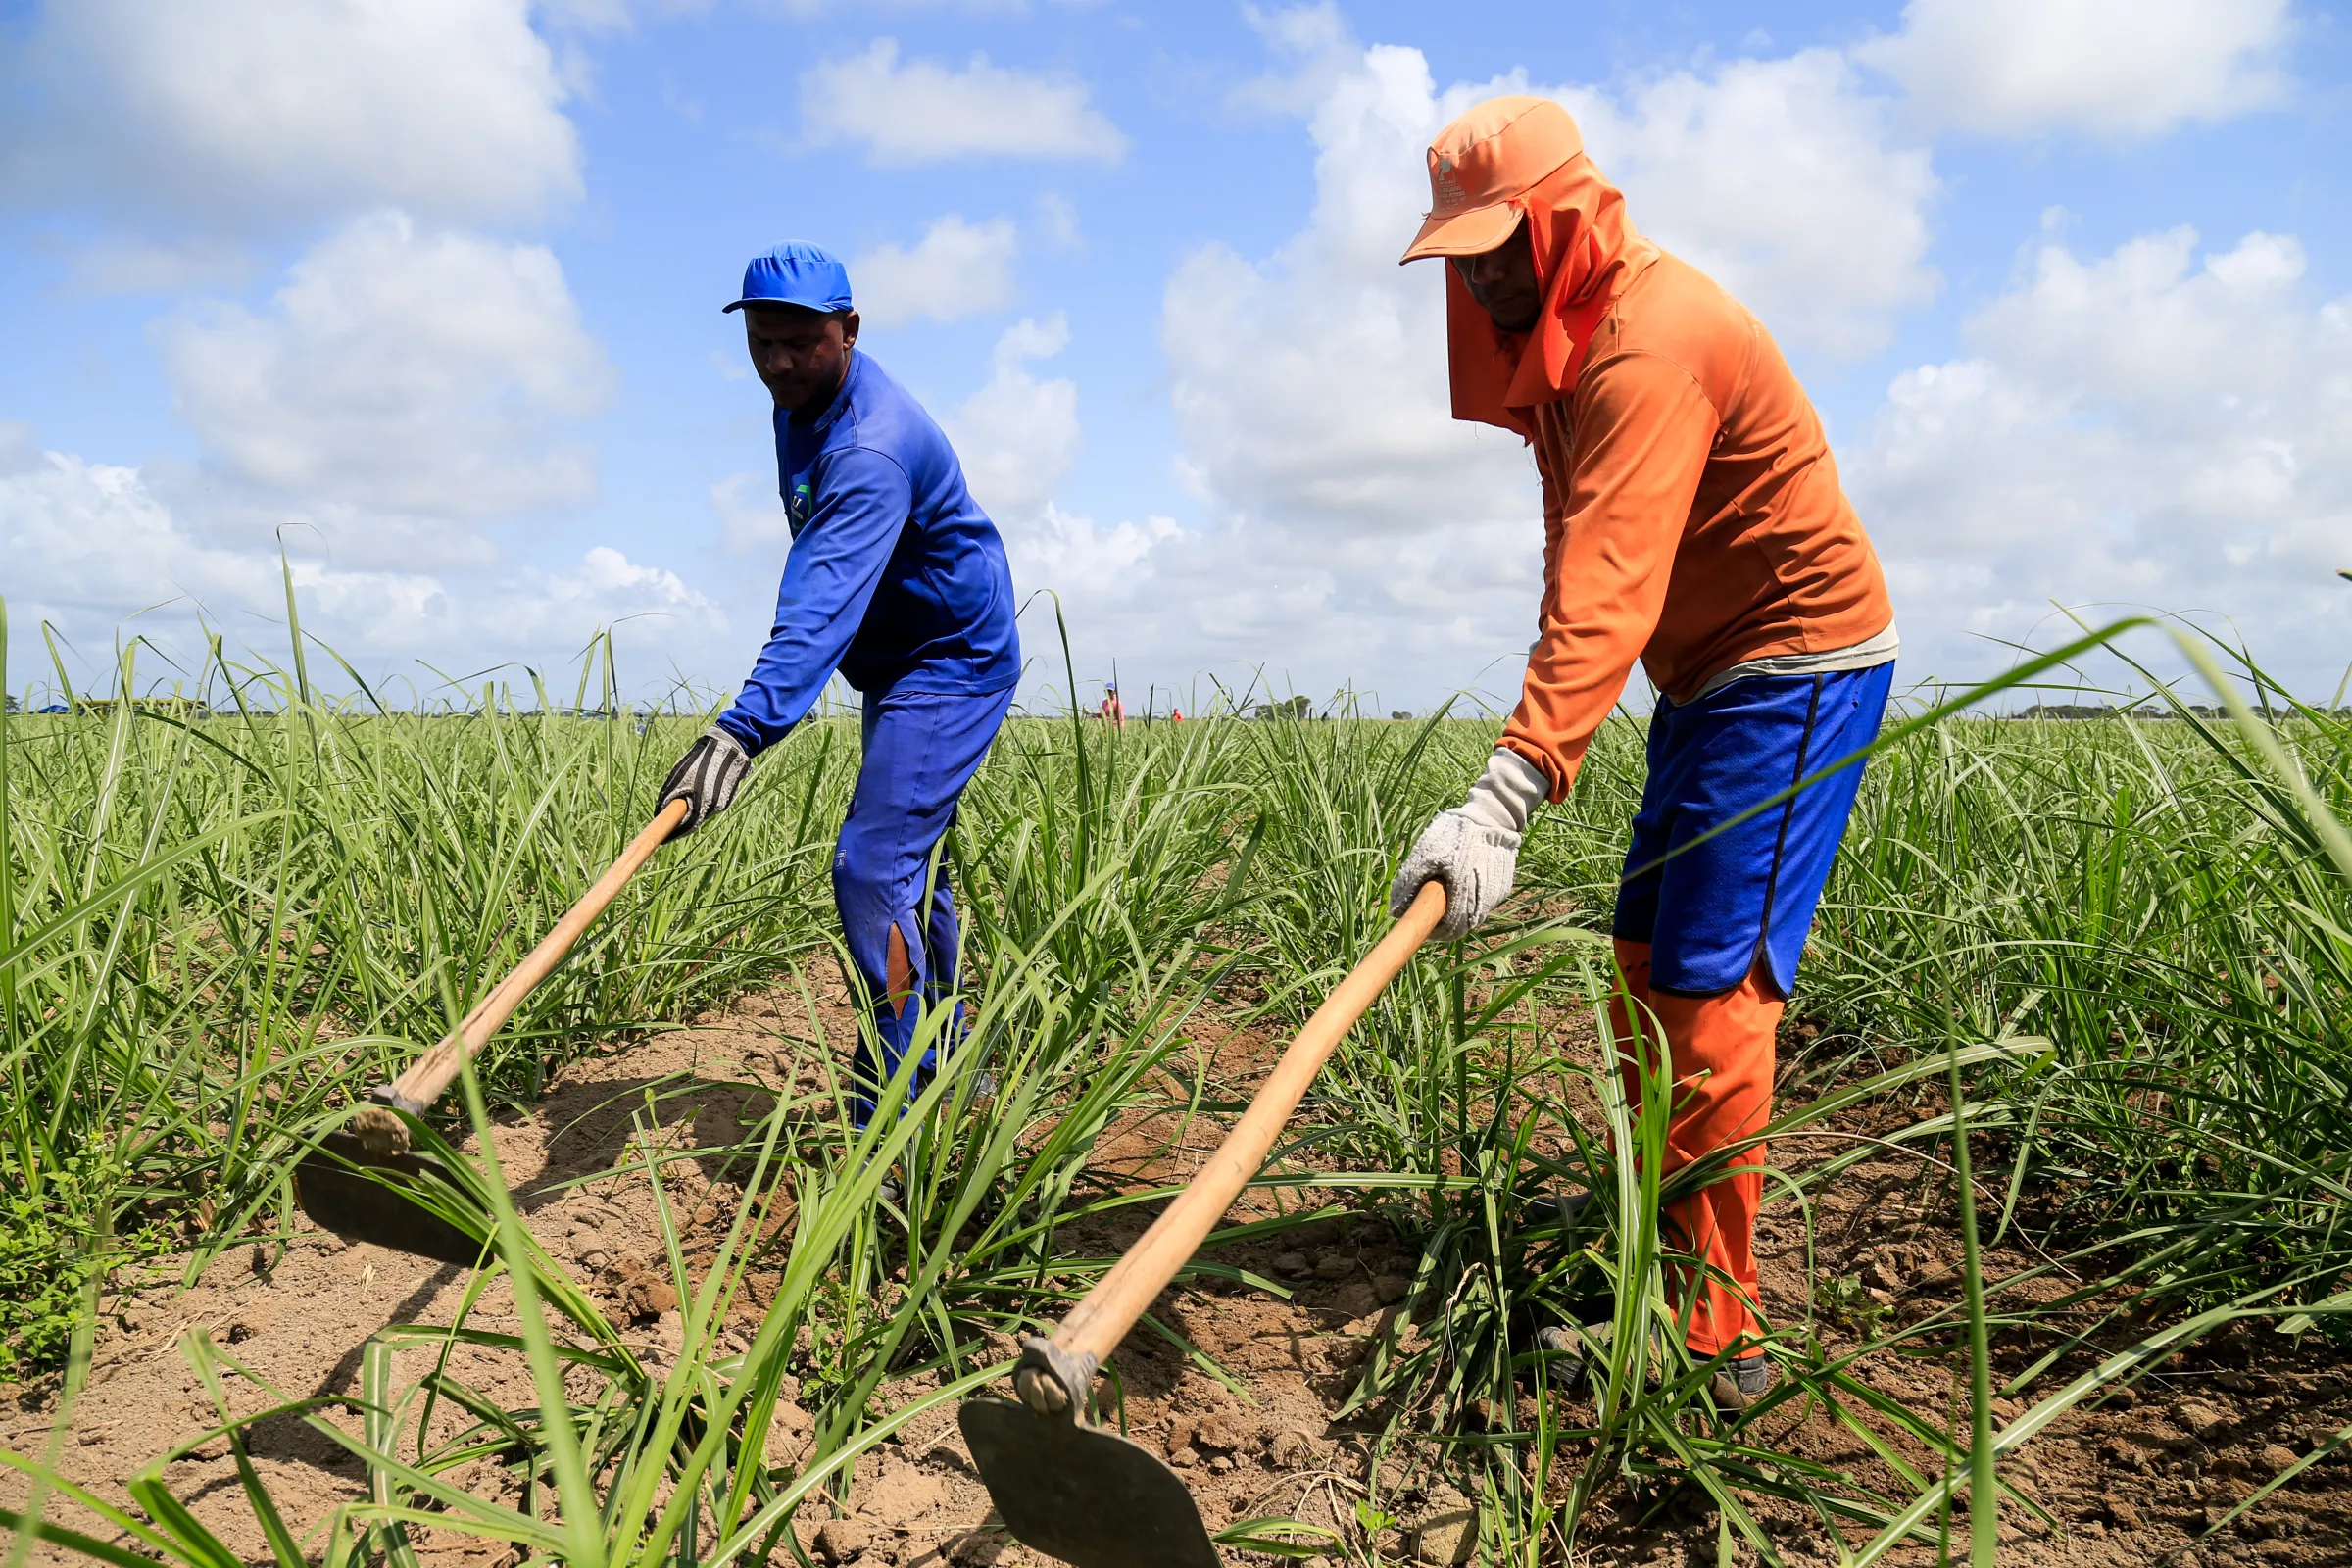 Workers till the ground at a sugarcane plantation near Maceio, Brazil, on September 27, 2021